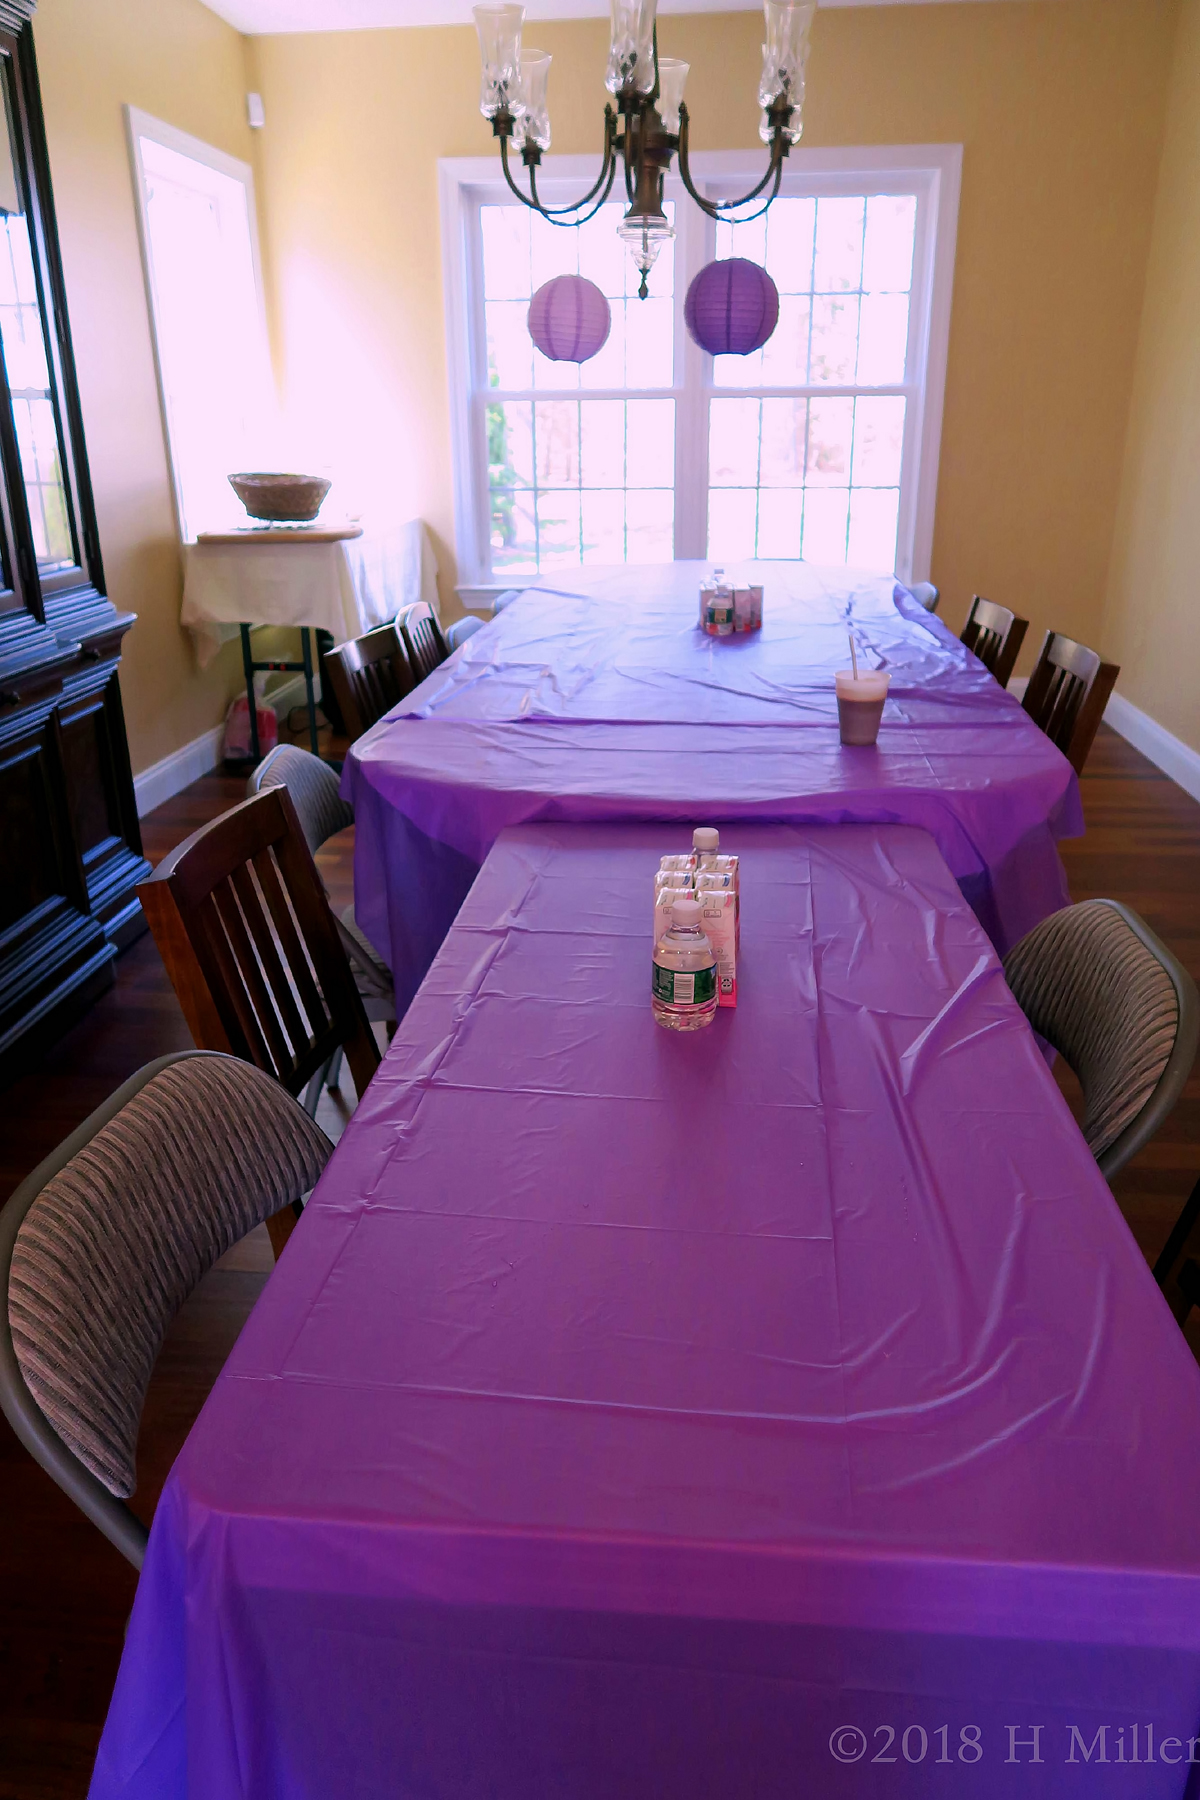 Lovely Purple Tablecloth Covers For Ava, The Birthday Girl! 